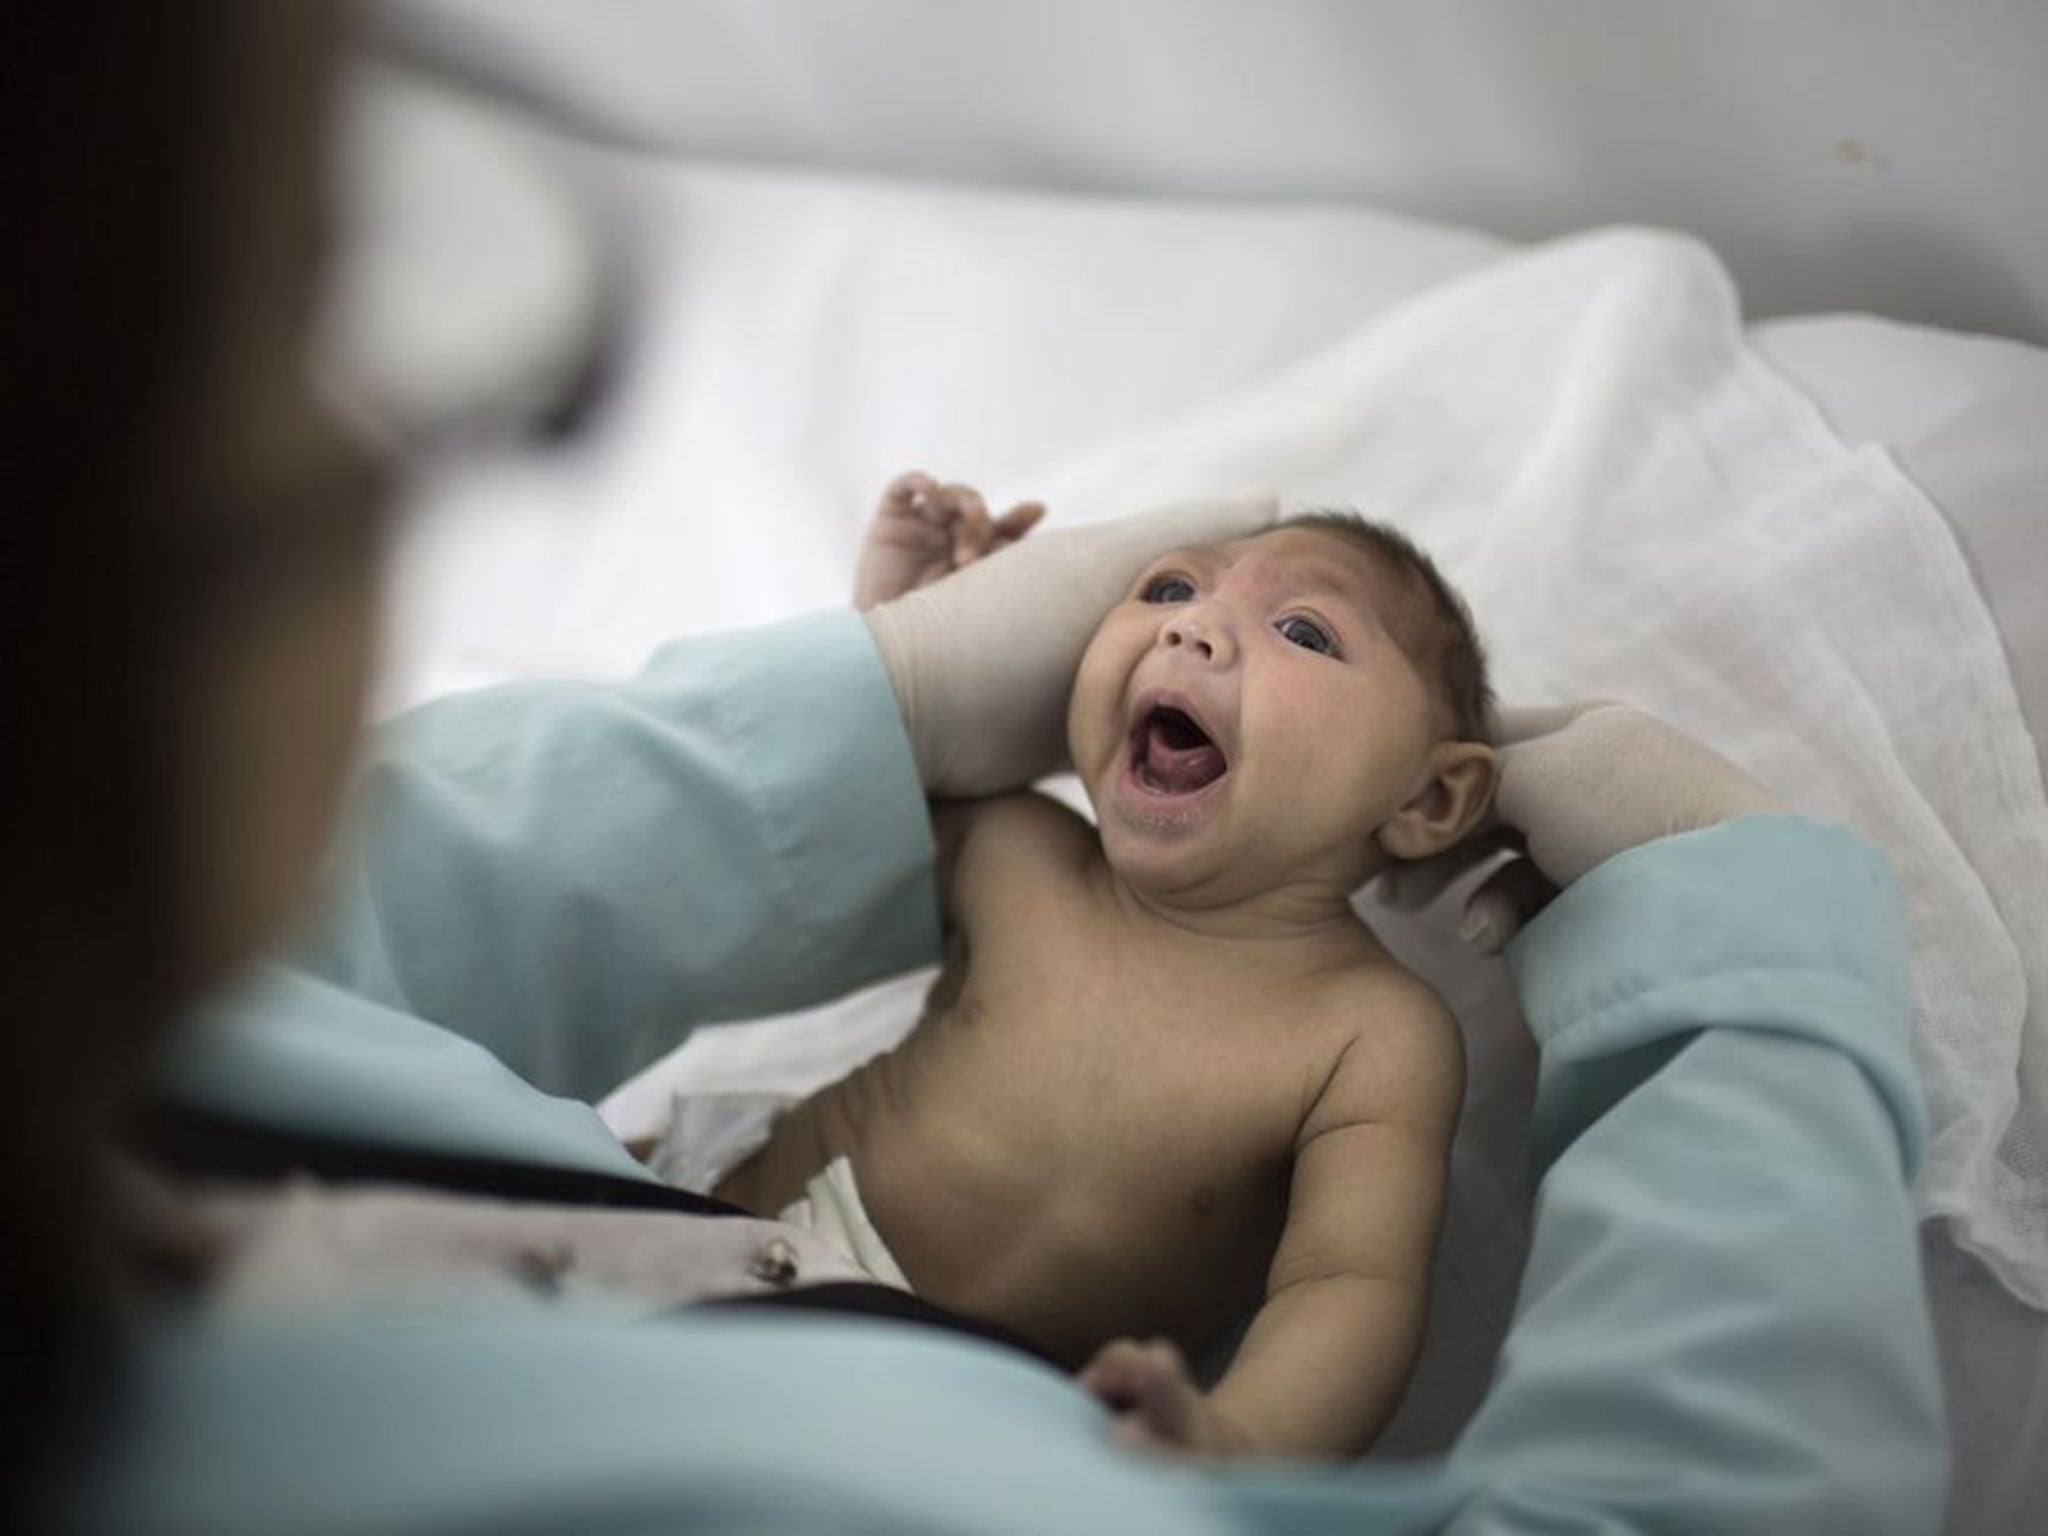 The World Health Organization says there is “strong scientific consensus” that Zika virus is a cause of microcephaly as well as other neurological disorders